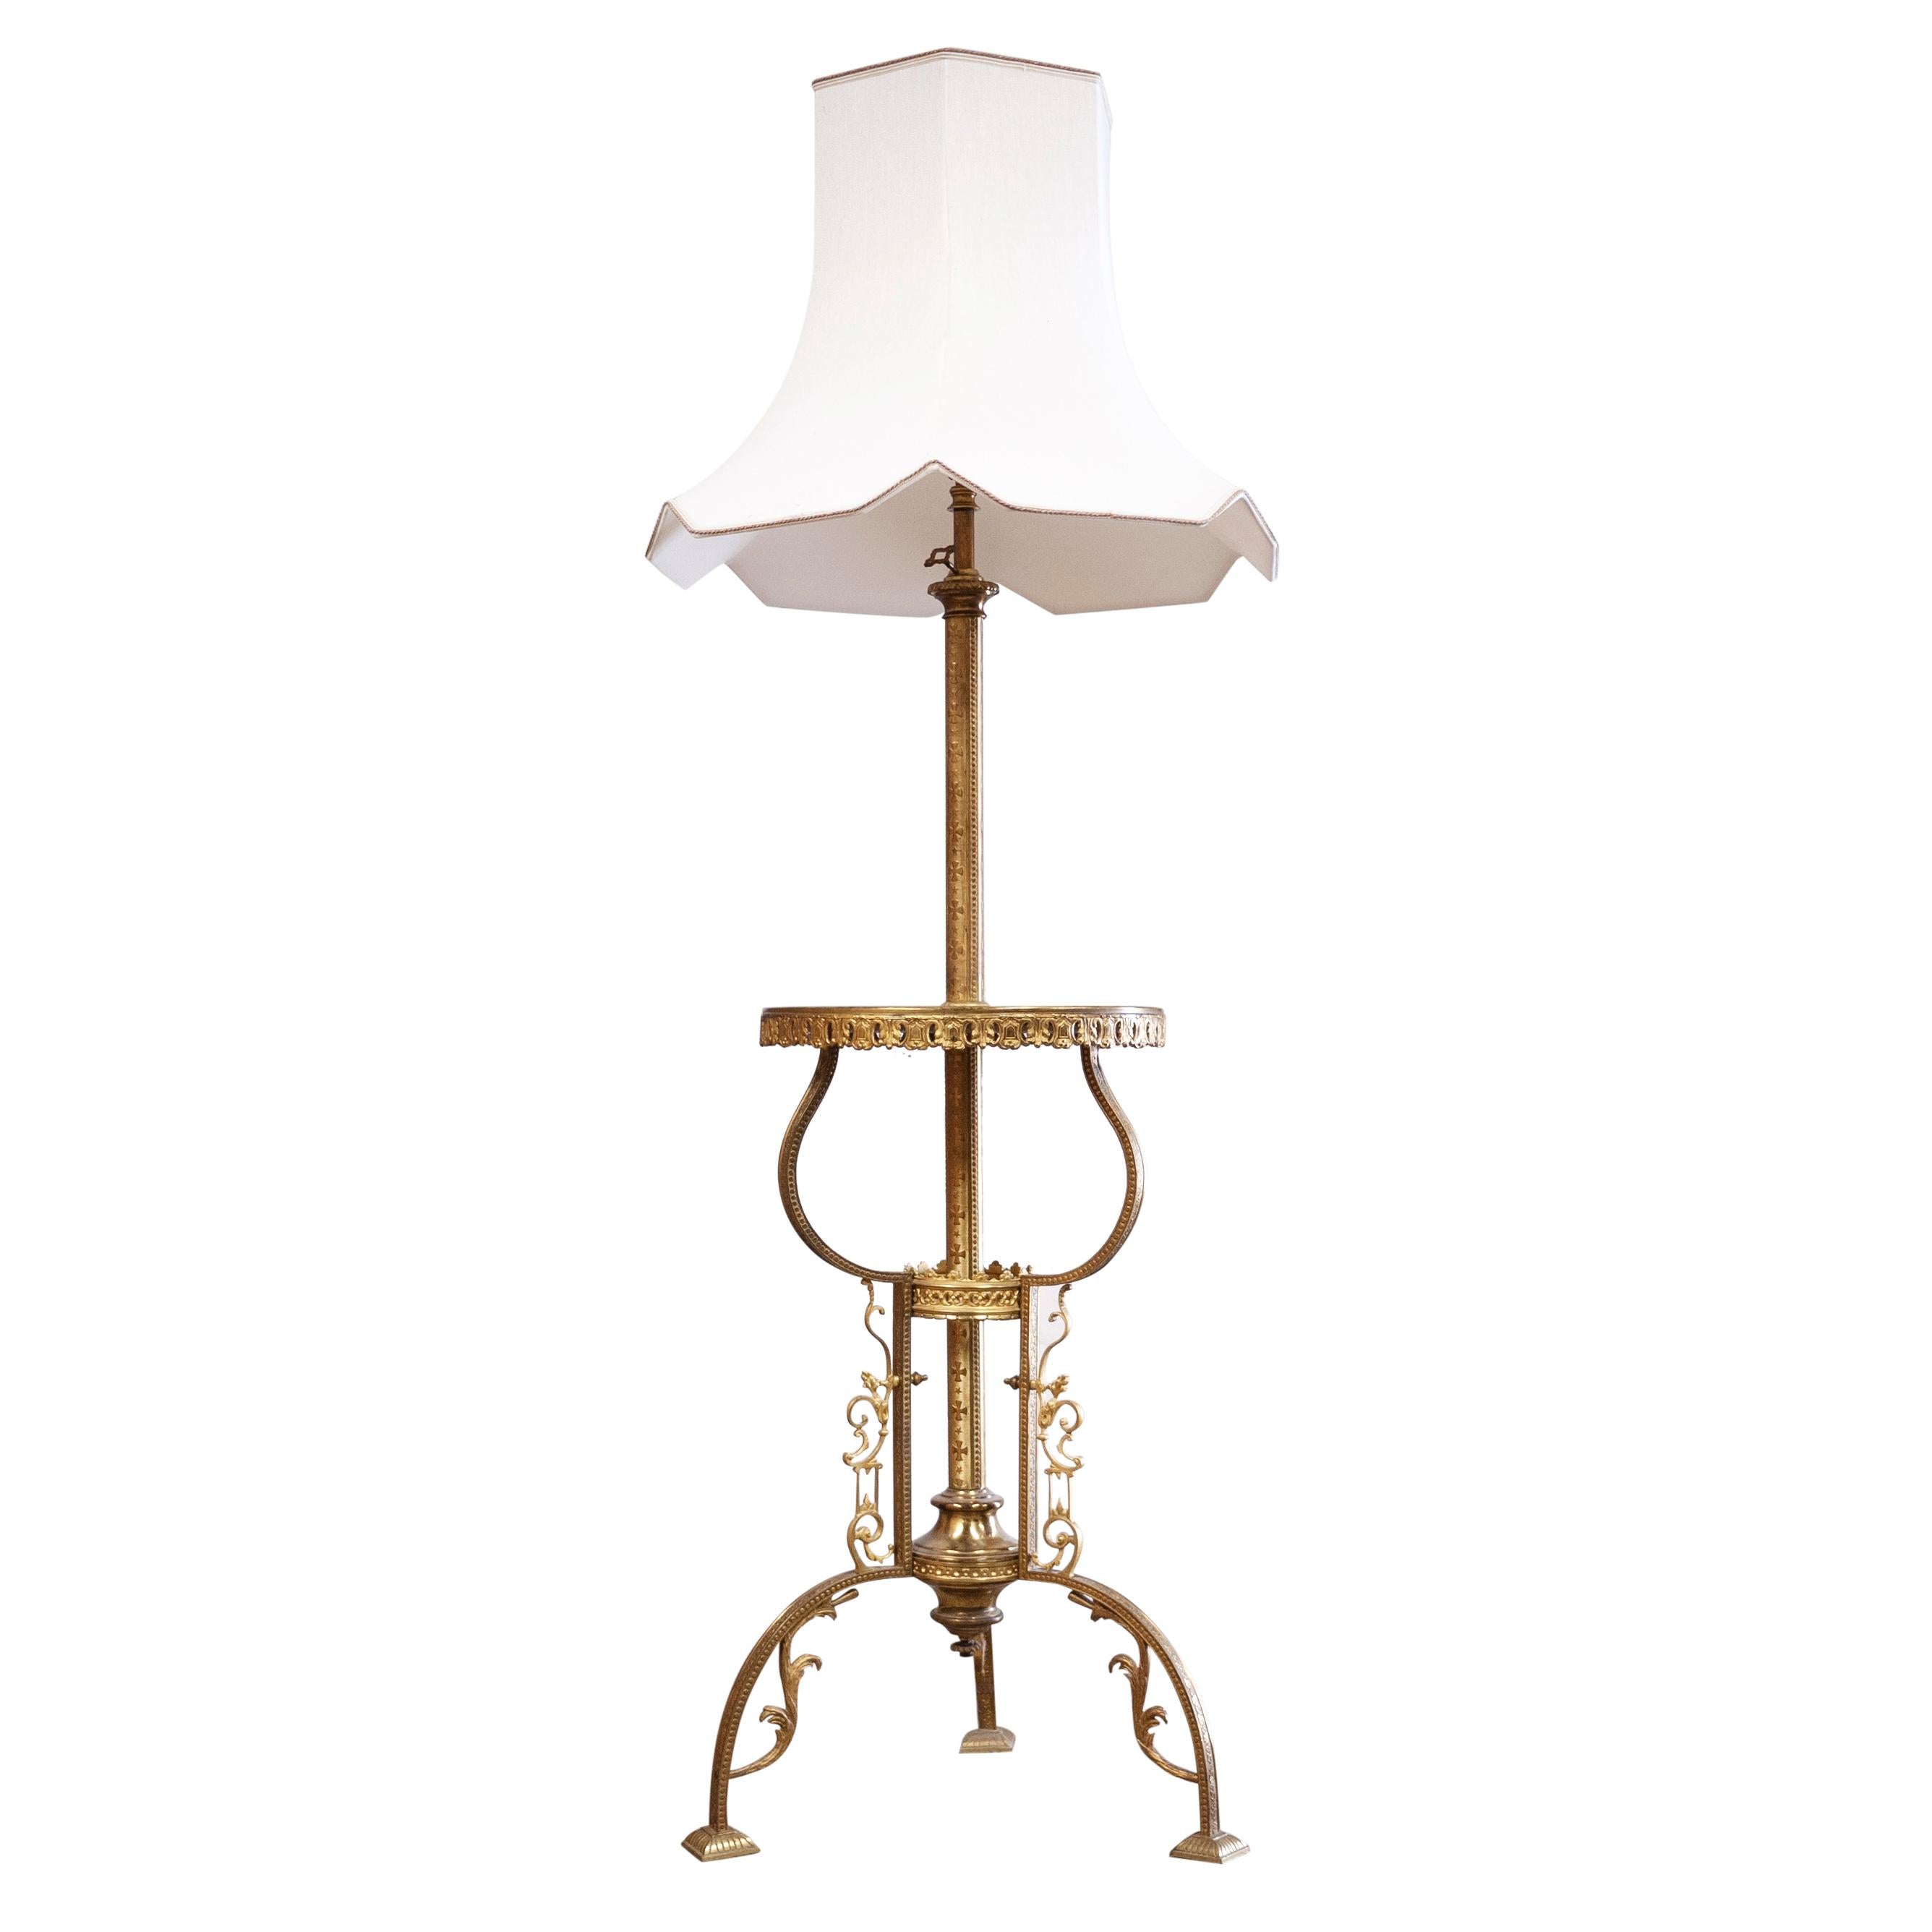 A French brass floor lamp with an onyx drinks table.

Manufacturer - Unknown

Design Period - 1930 to 1939

Country of origin - French

Style - Vintage

Detailed Condition - Good — This vintage item remains fully functional, but it shows